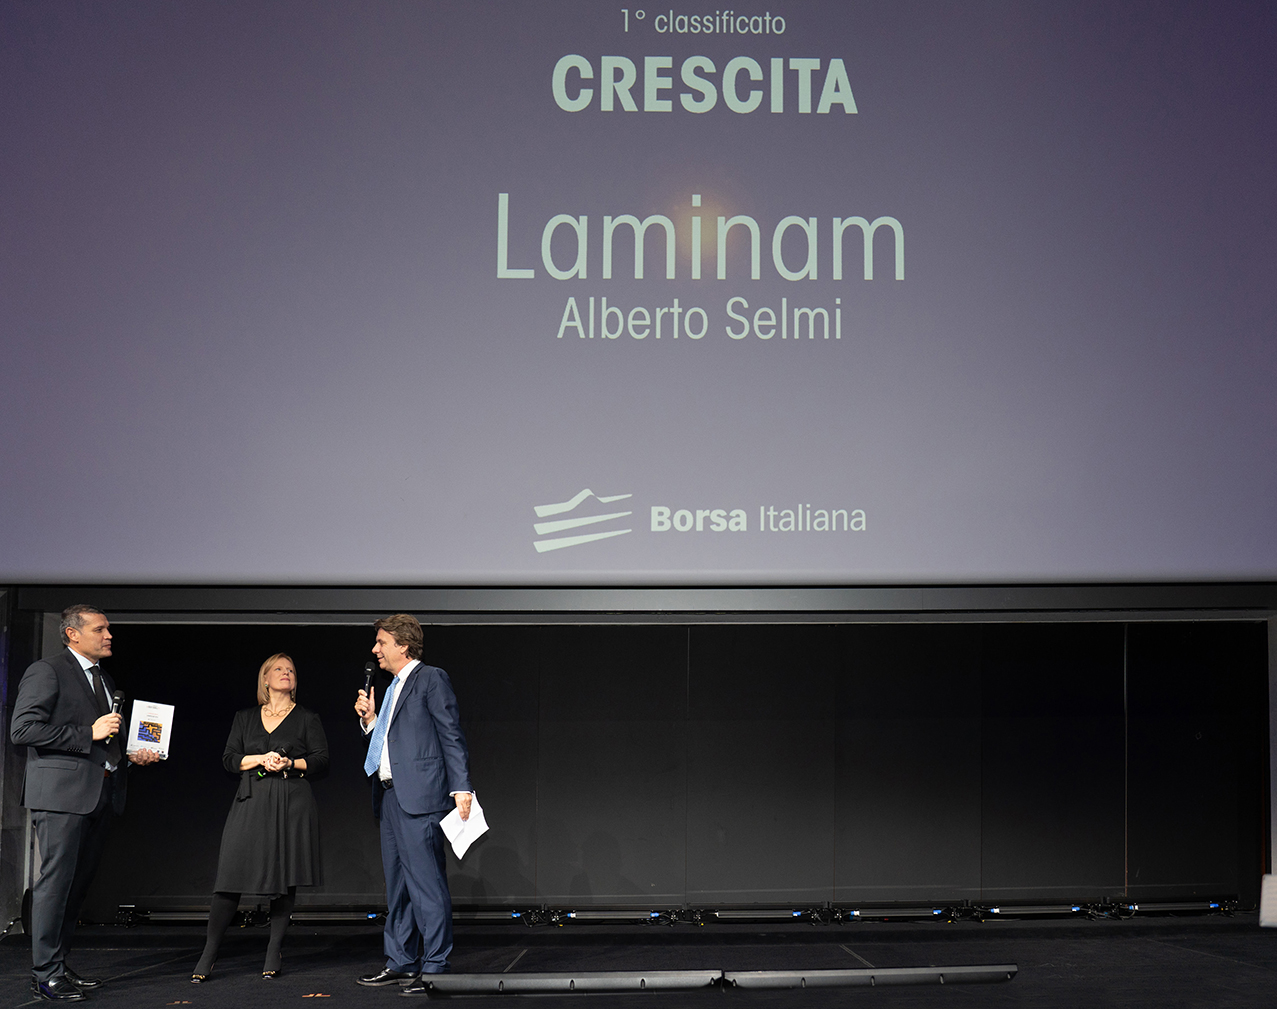 Laminam comes first in LeQuotabili 2019 by Pambianco